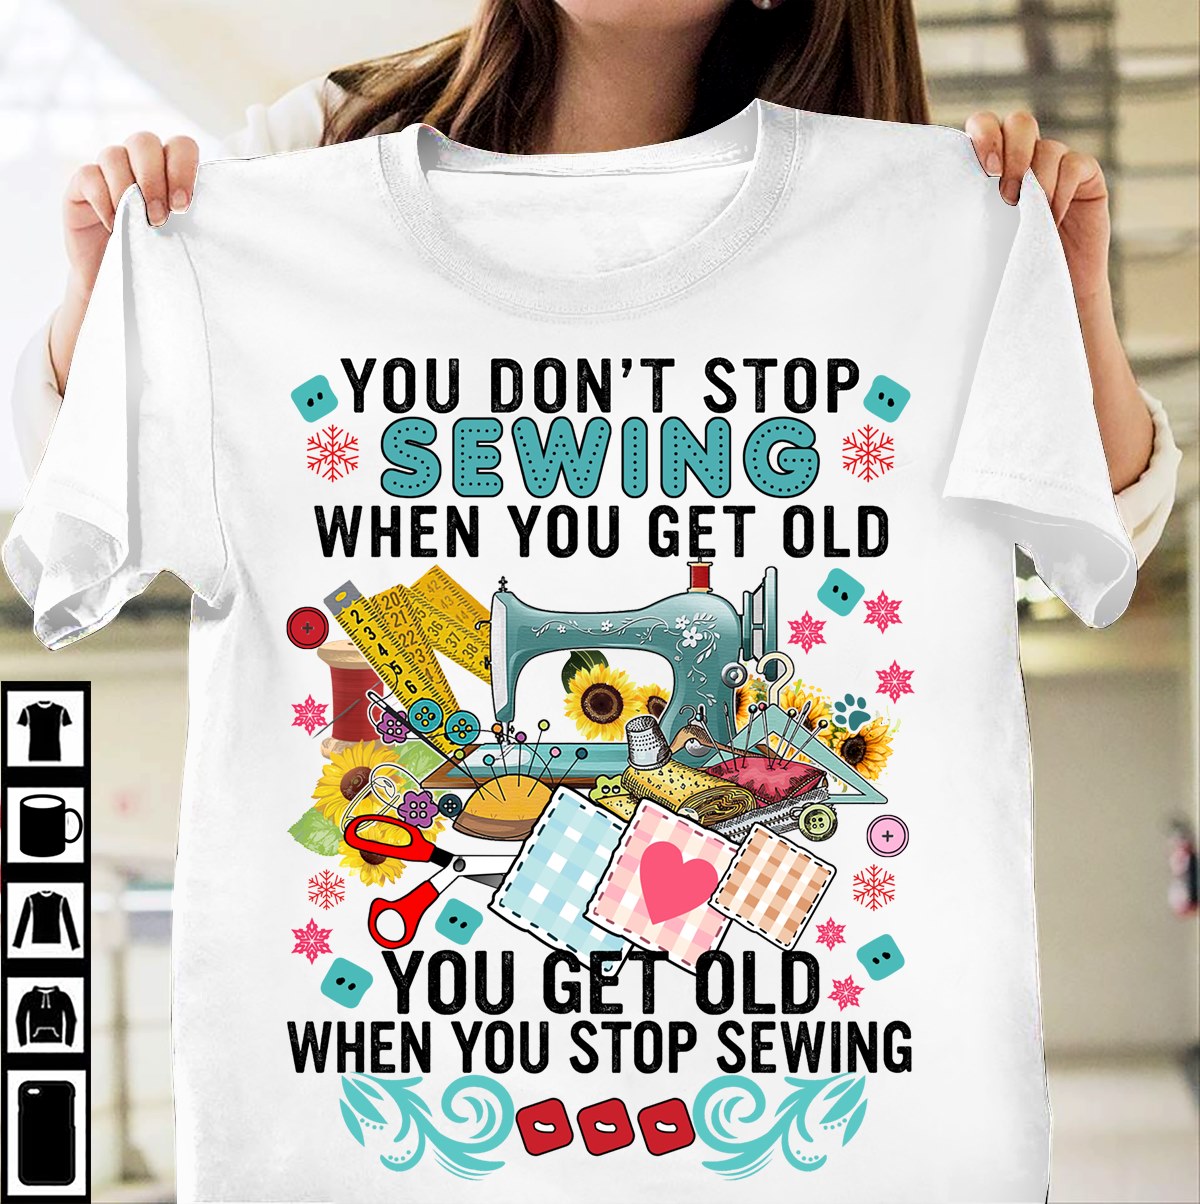 You don't stop sewing when you get old - Sewing machine, T-shirt for sewing lover